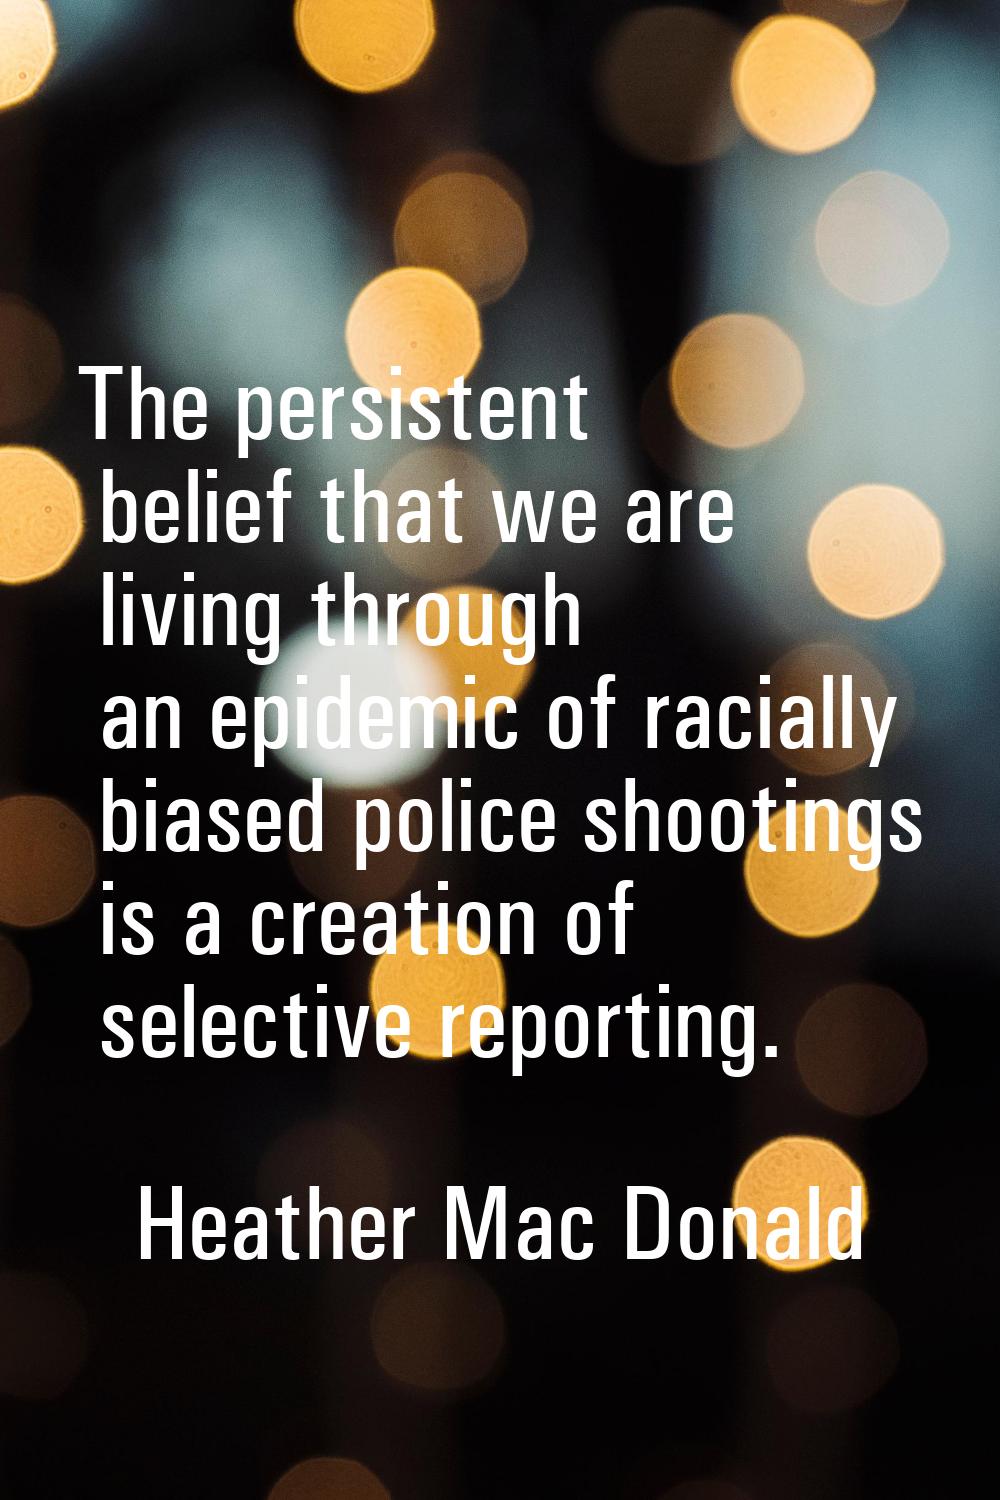 The persistent belief that we are living through an epidemic of racially biased police shootings is